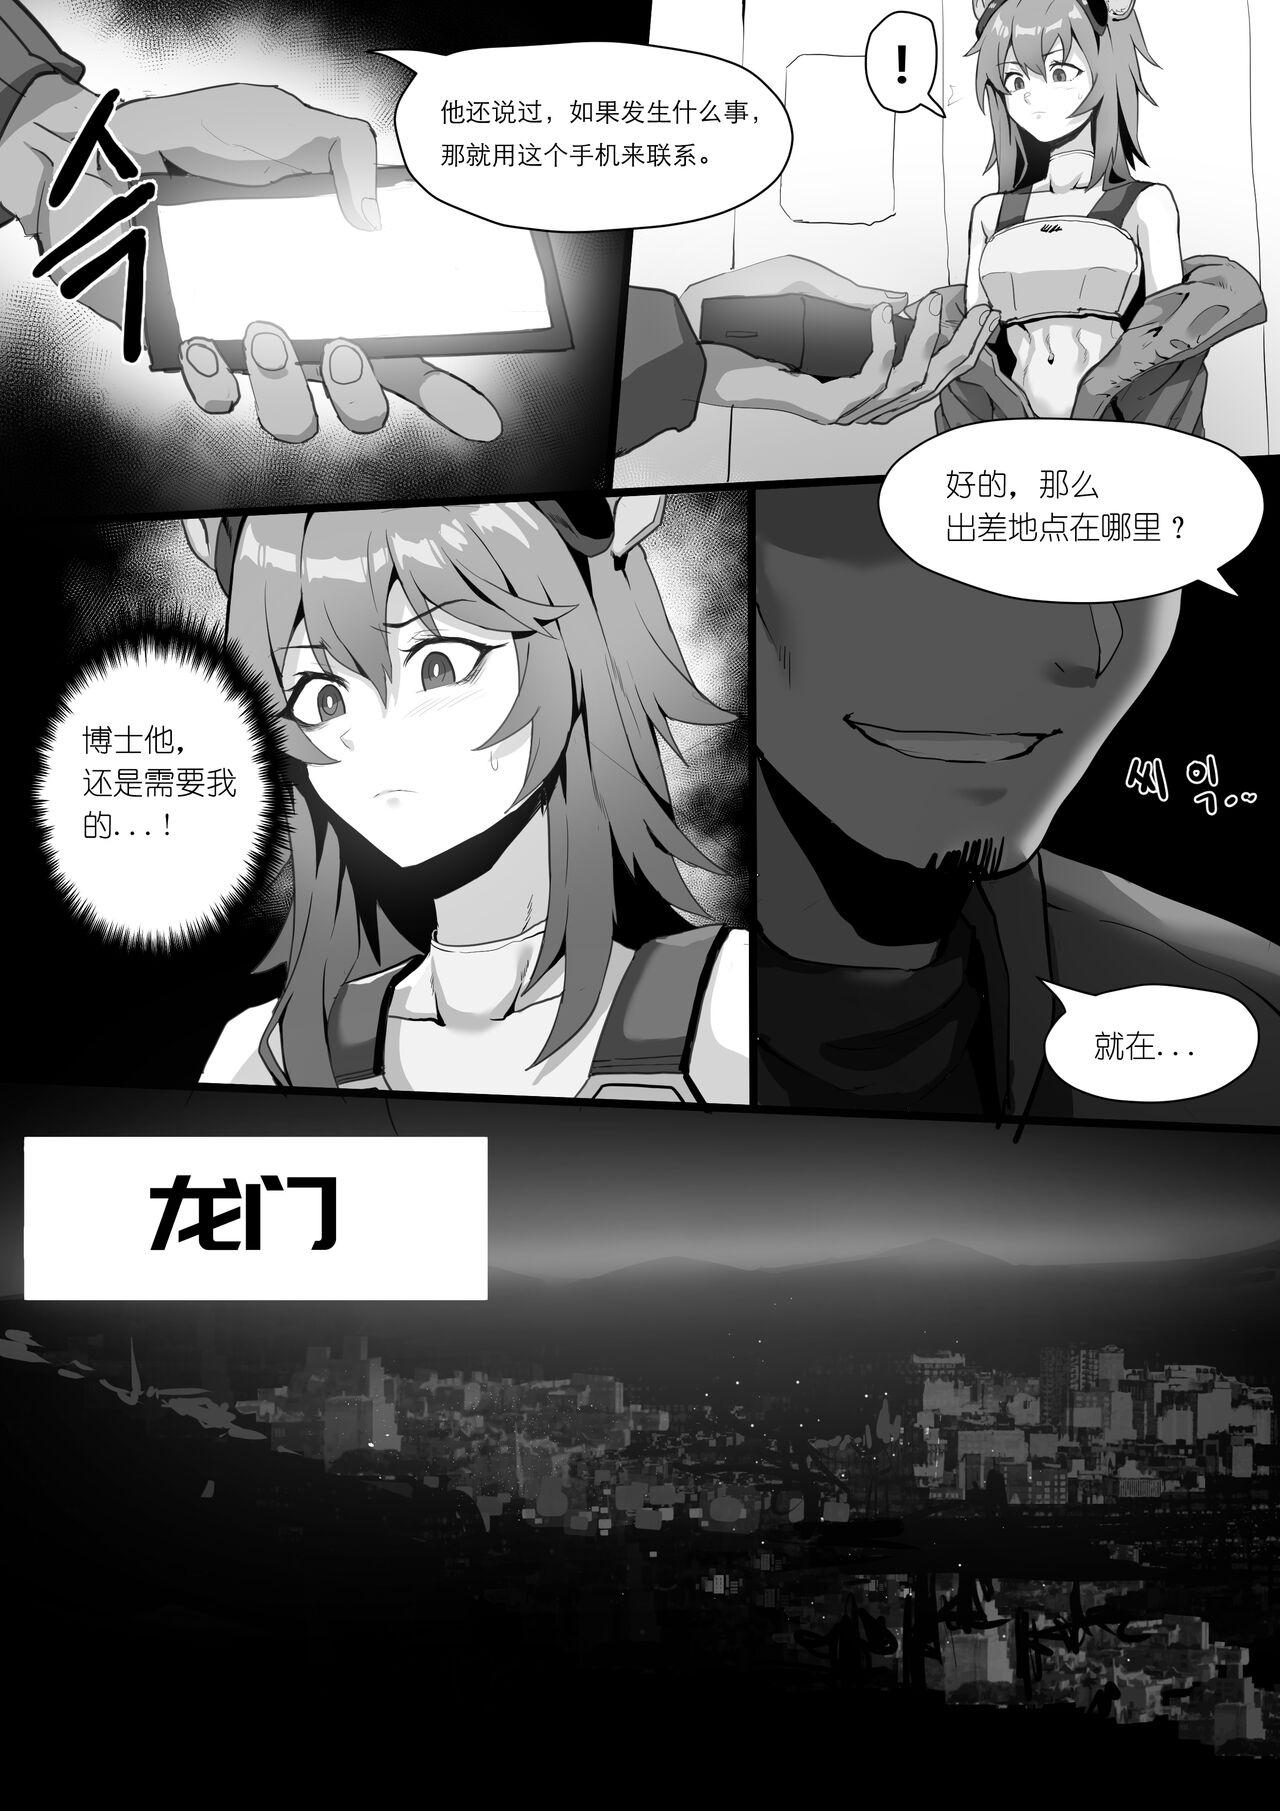 Kiss 欲望方舟记录3 - Arknights Riding Cock - Page 7